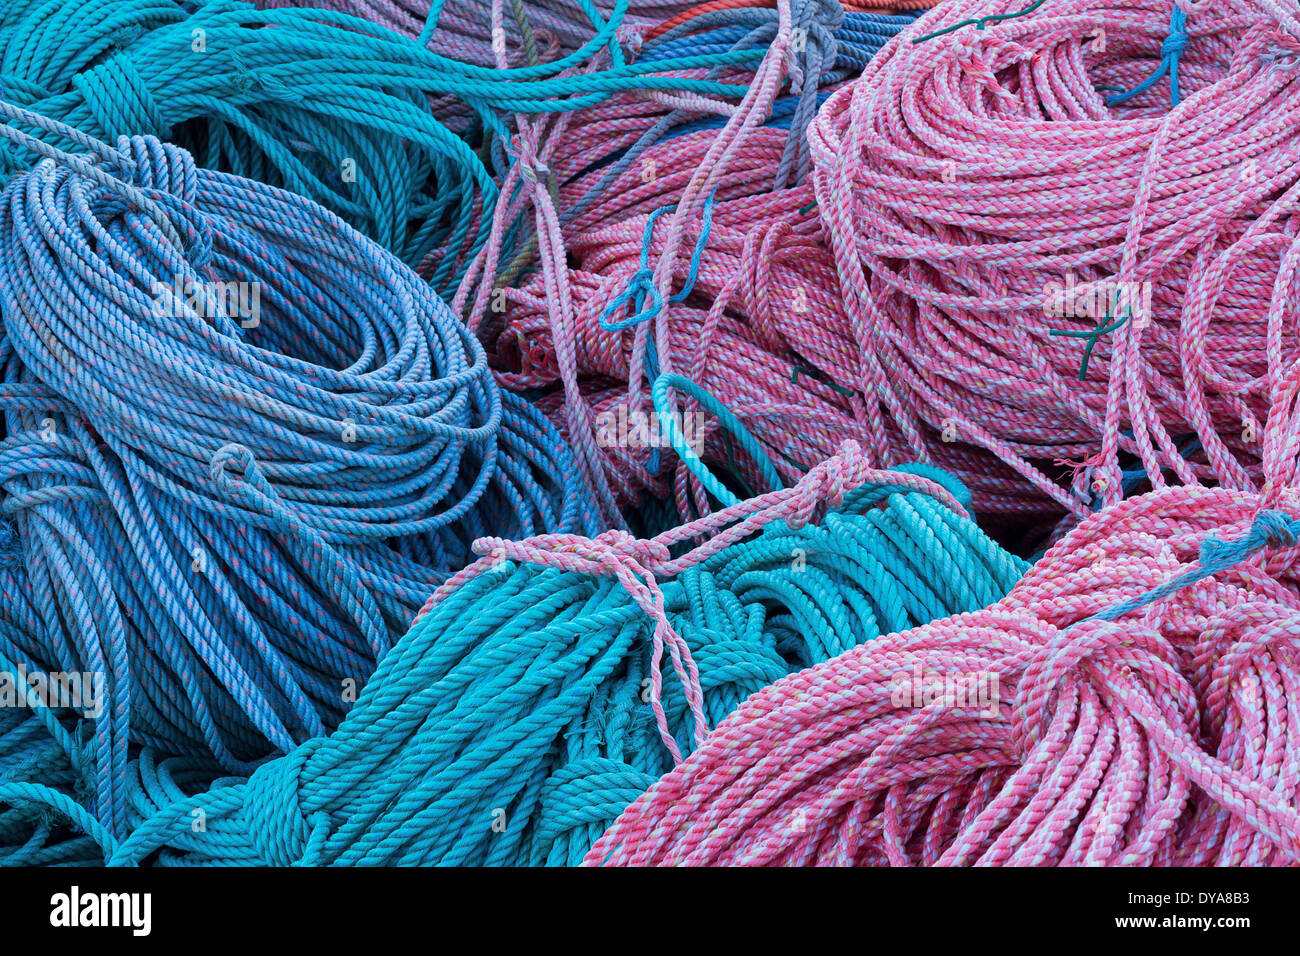 rope coil coiled coils pattern colour dock harbor harbour fishing crabbing sea ocean warf seaside Oregon OR USA America, Stock Photo